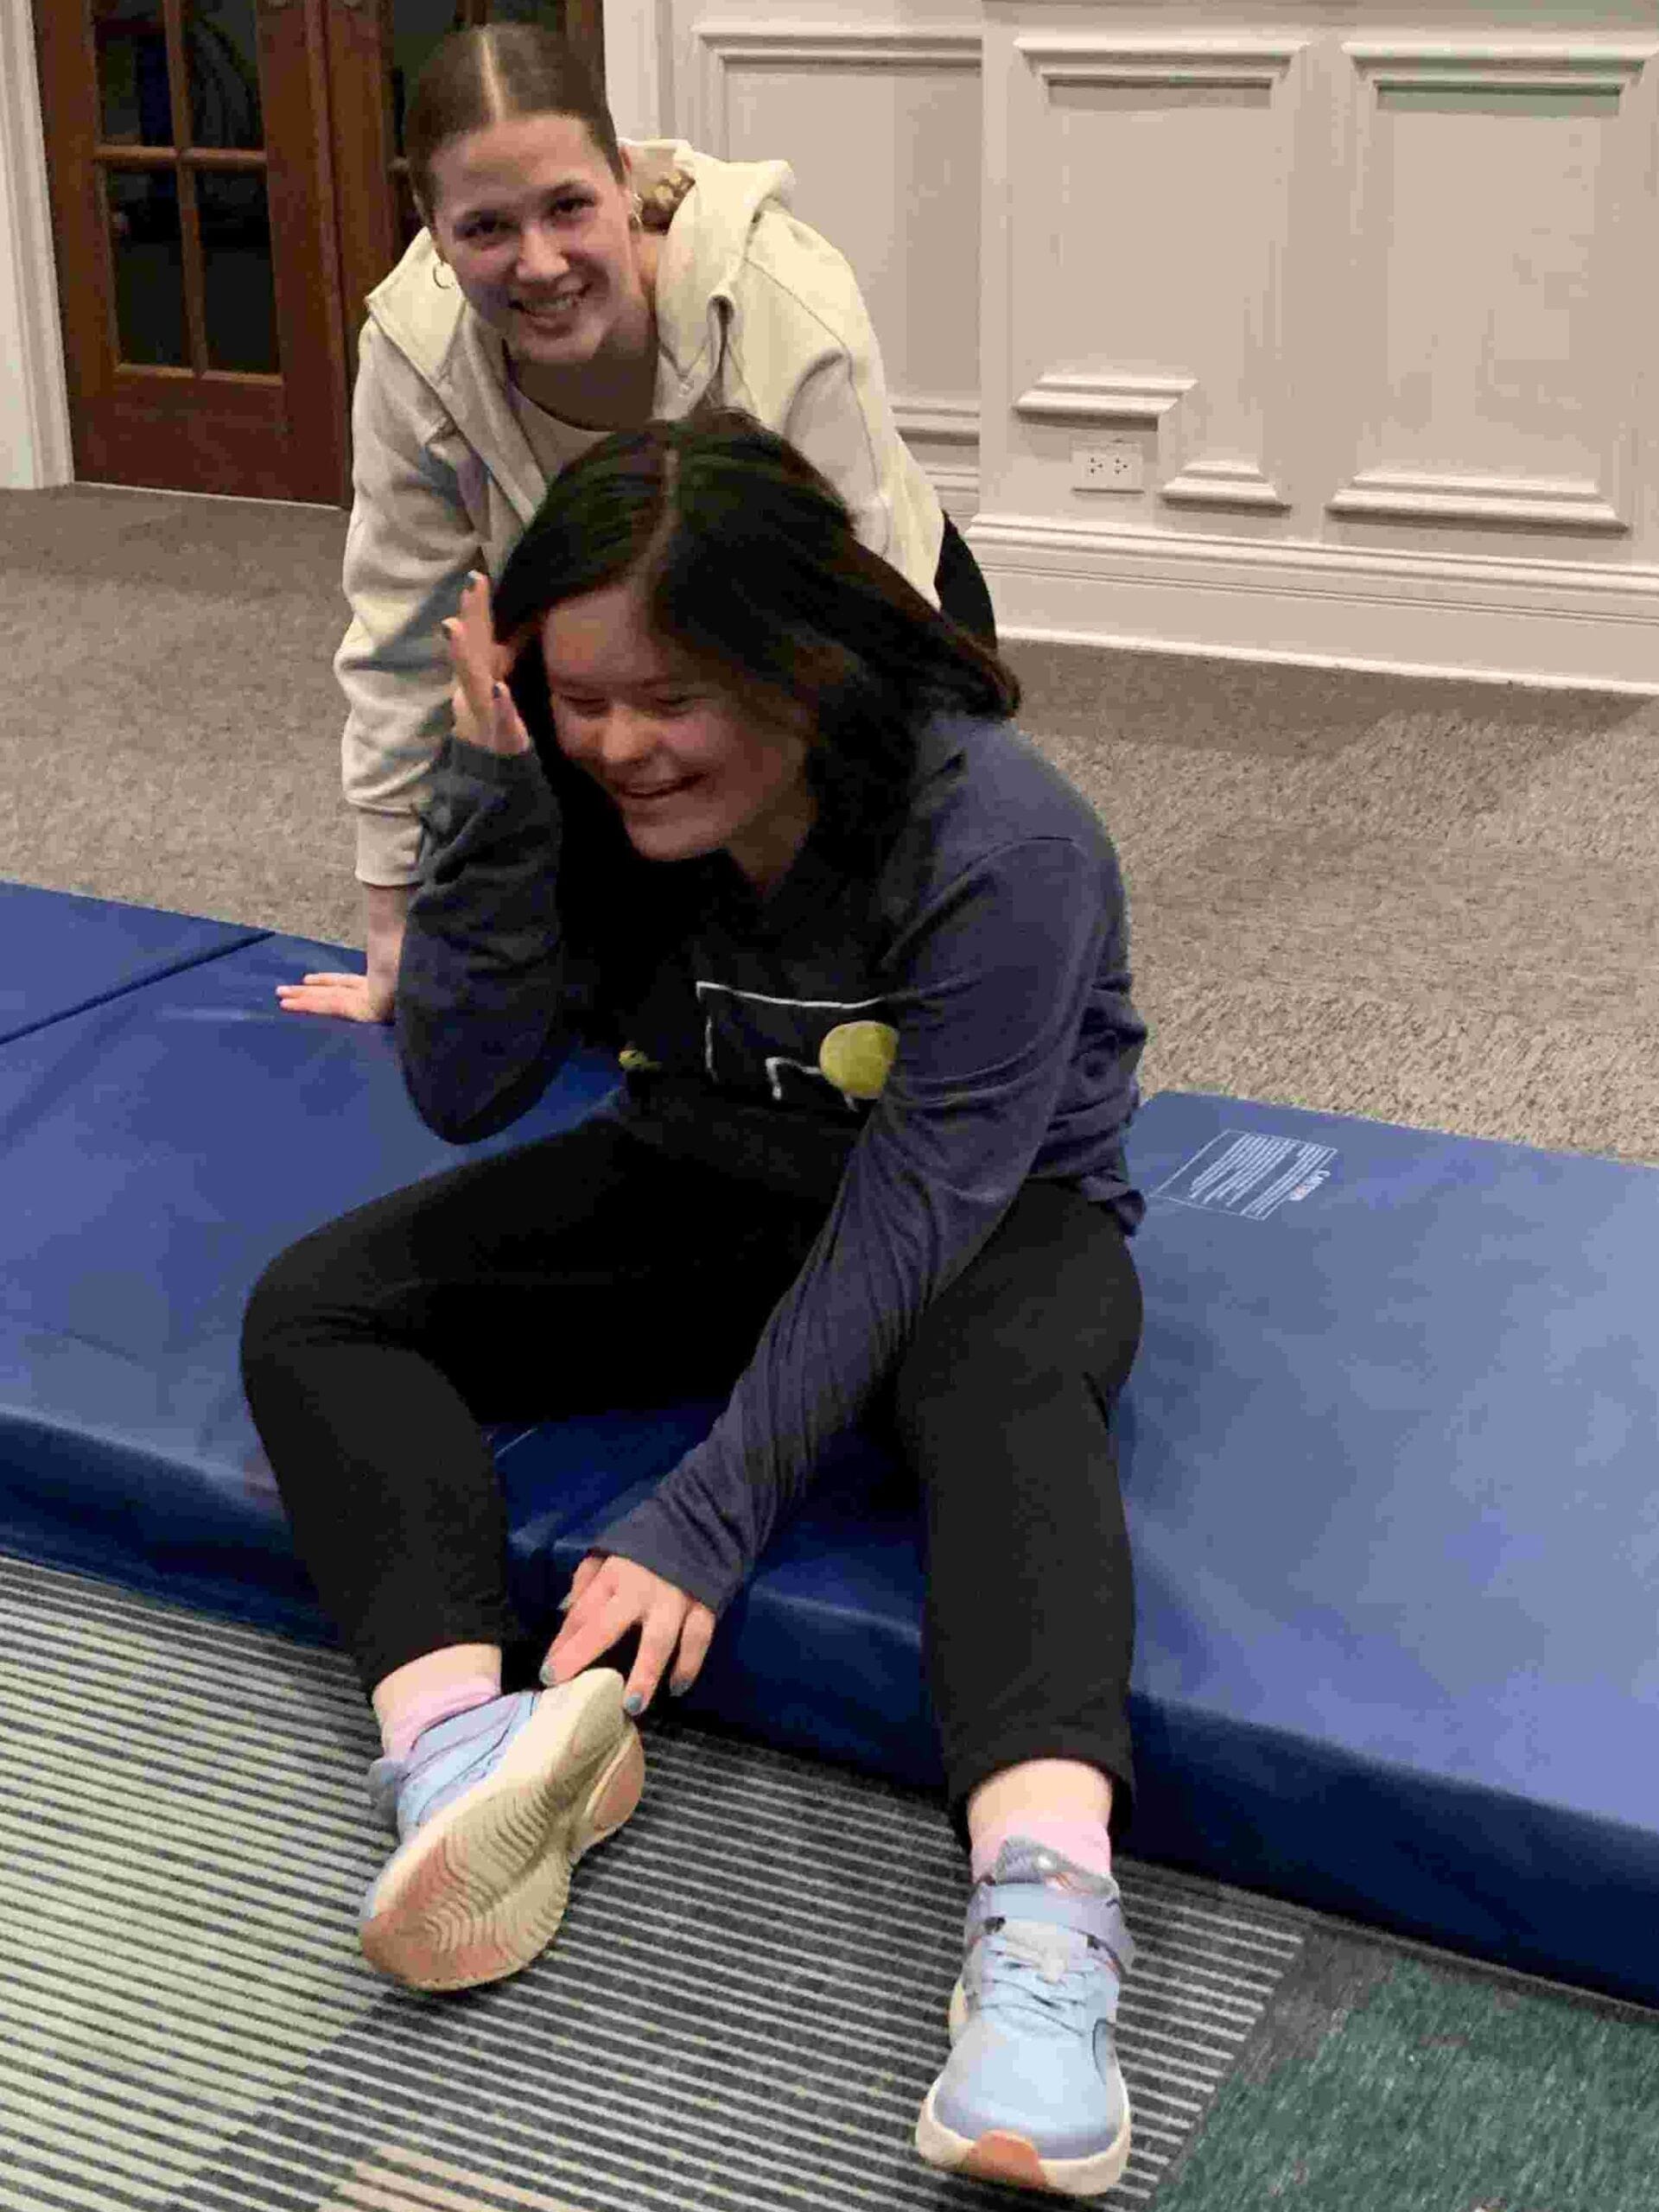 Katie a volunteer and Hannah a participant with Down syndrome rest after practicing back bends at dance class